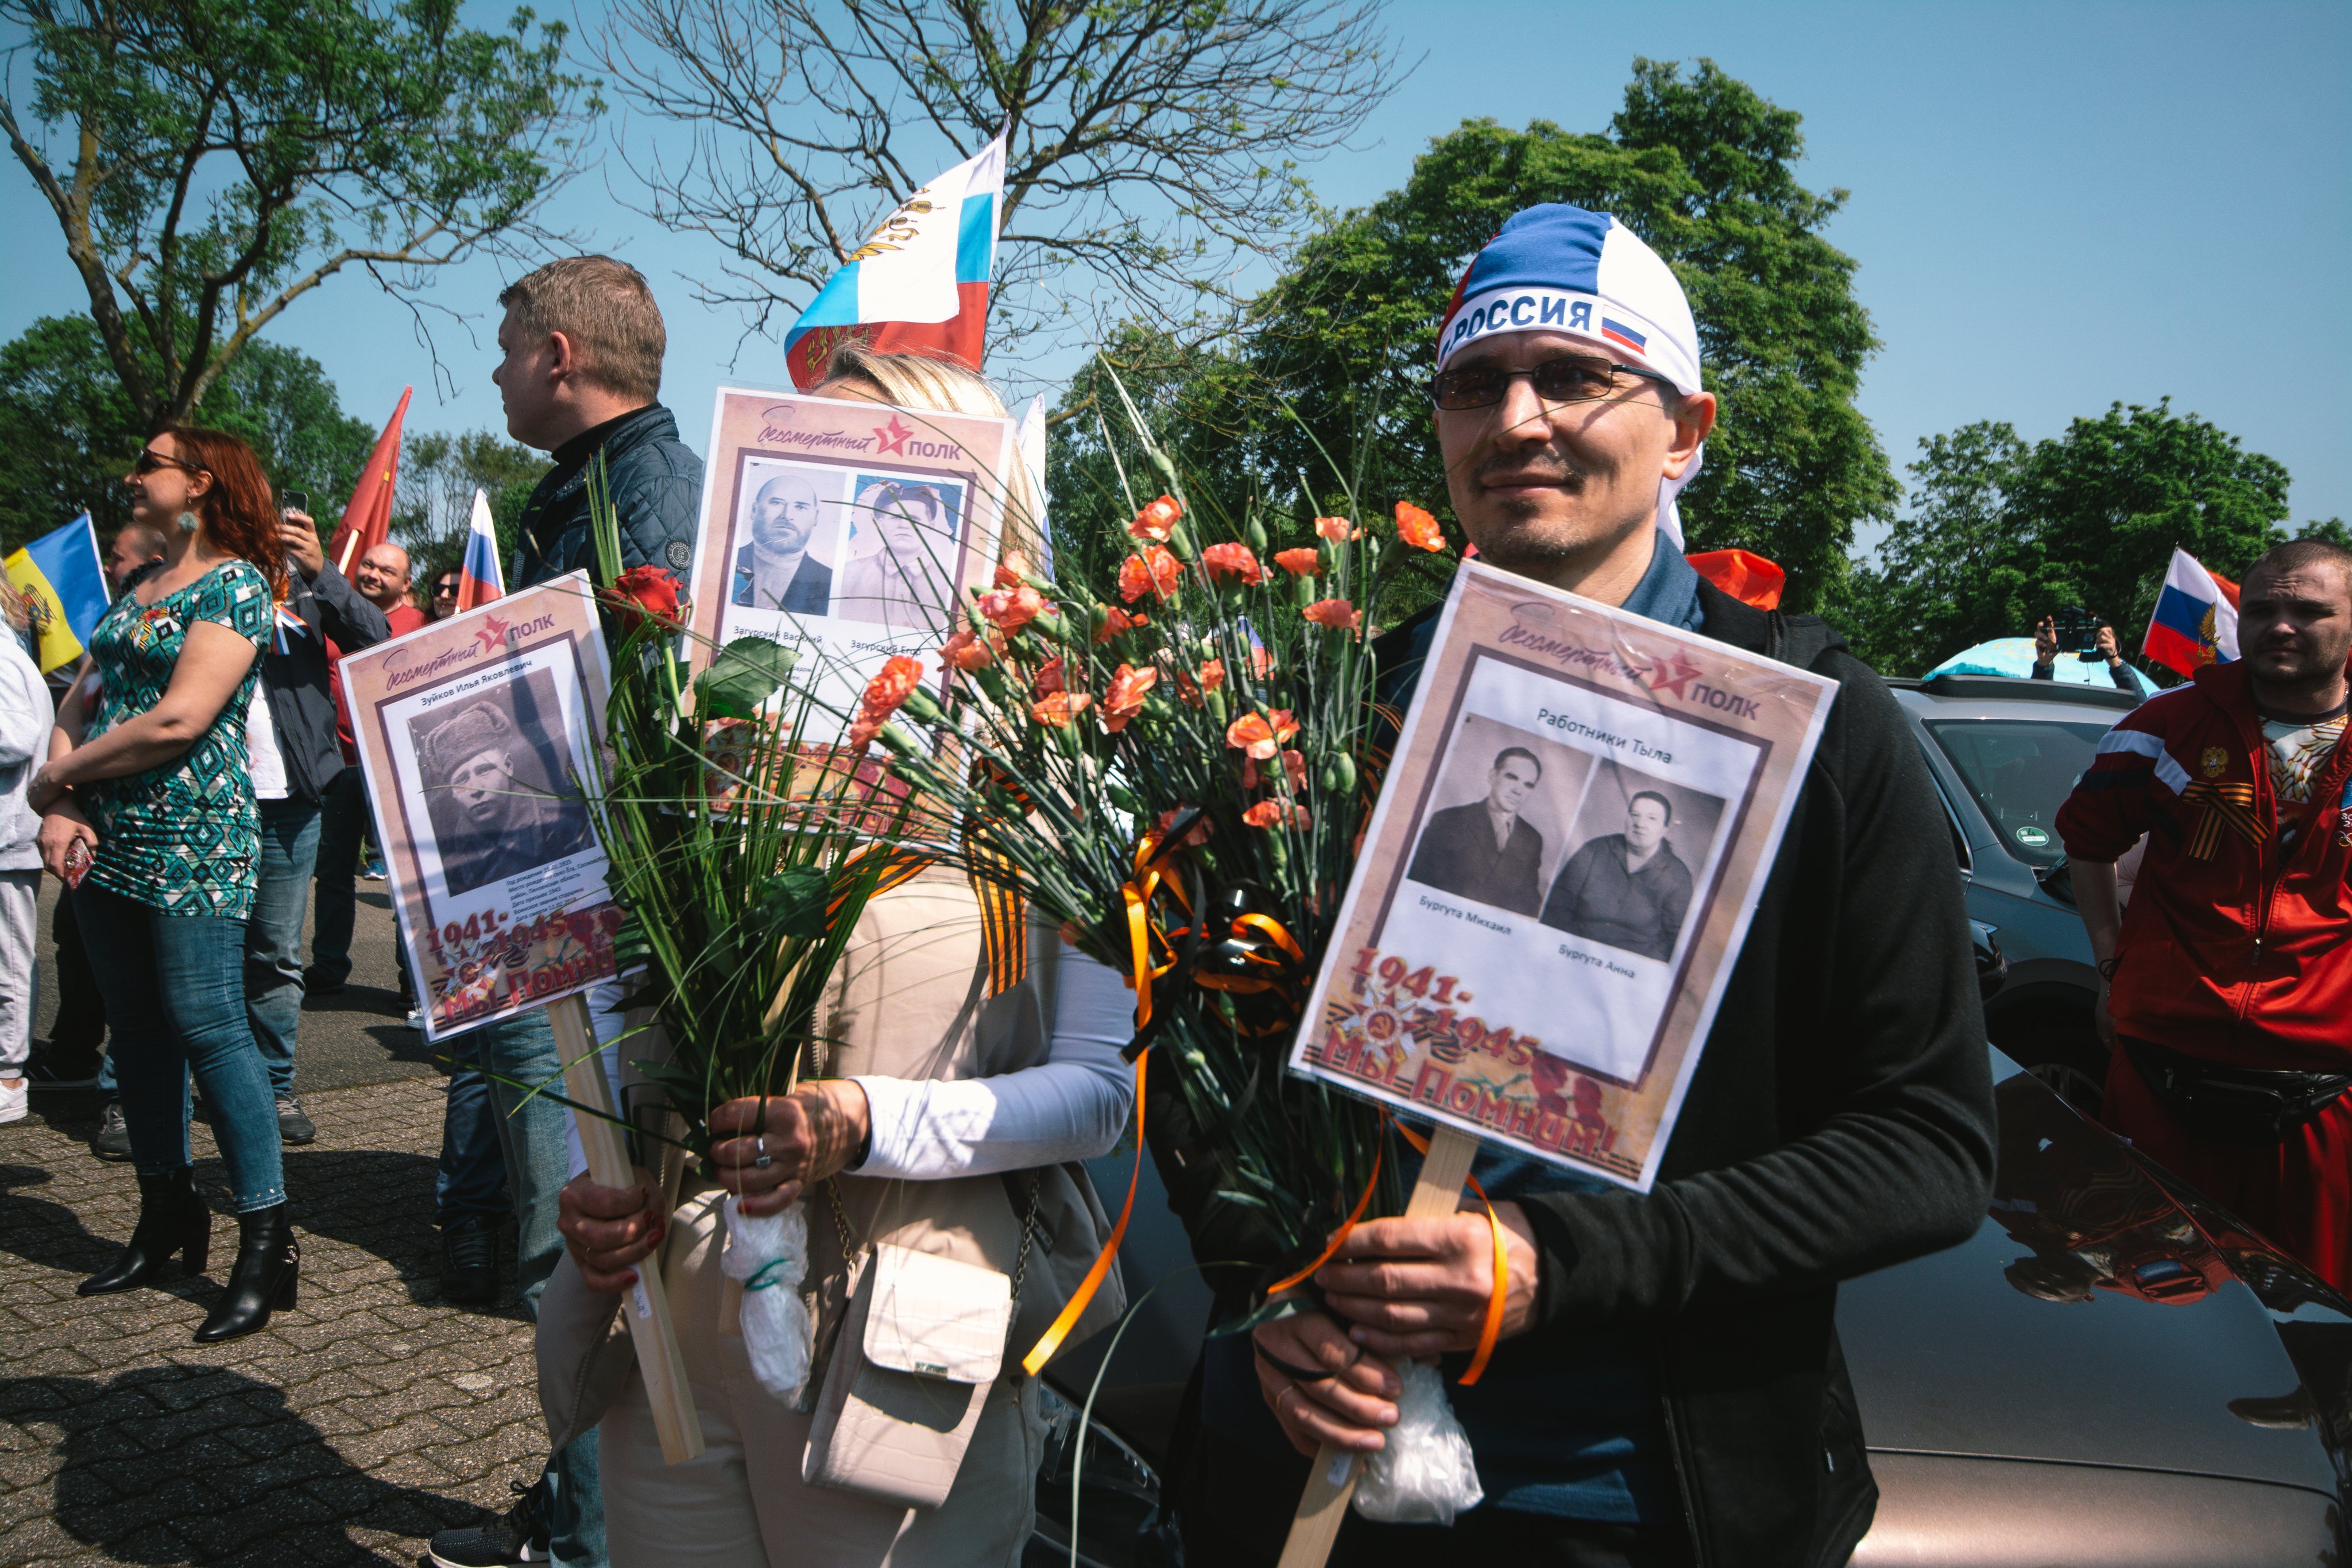 Pro Russian Car Parade To Commemorate The 77th Aniversary Of V-E Day In Cologne